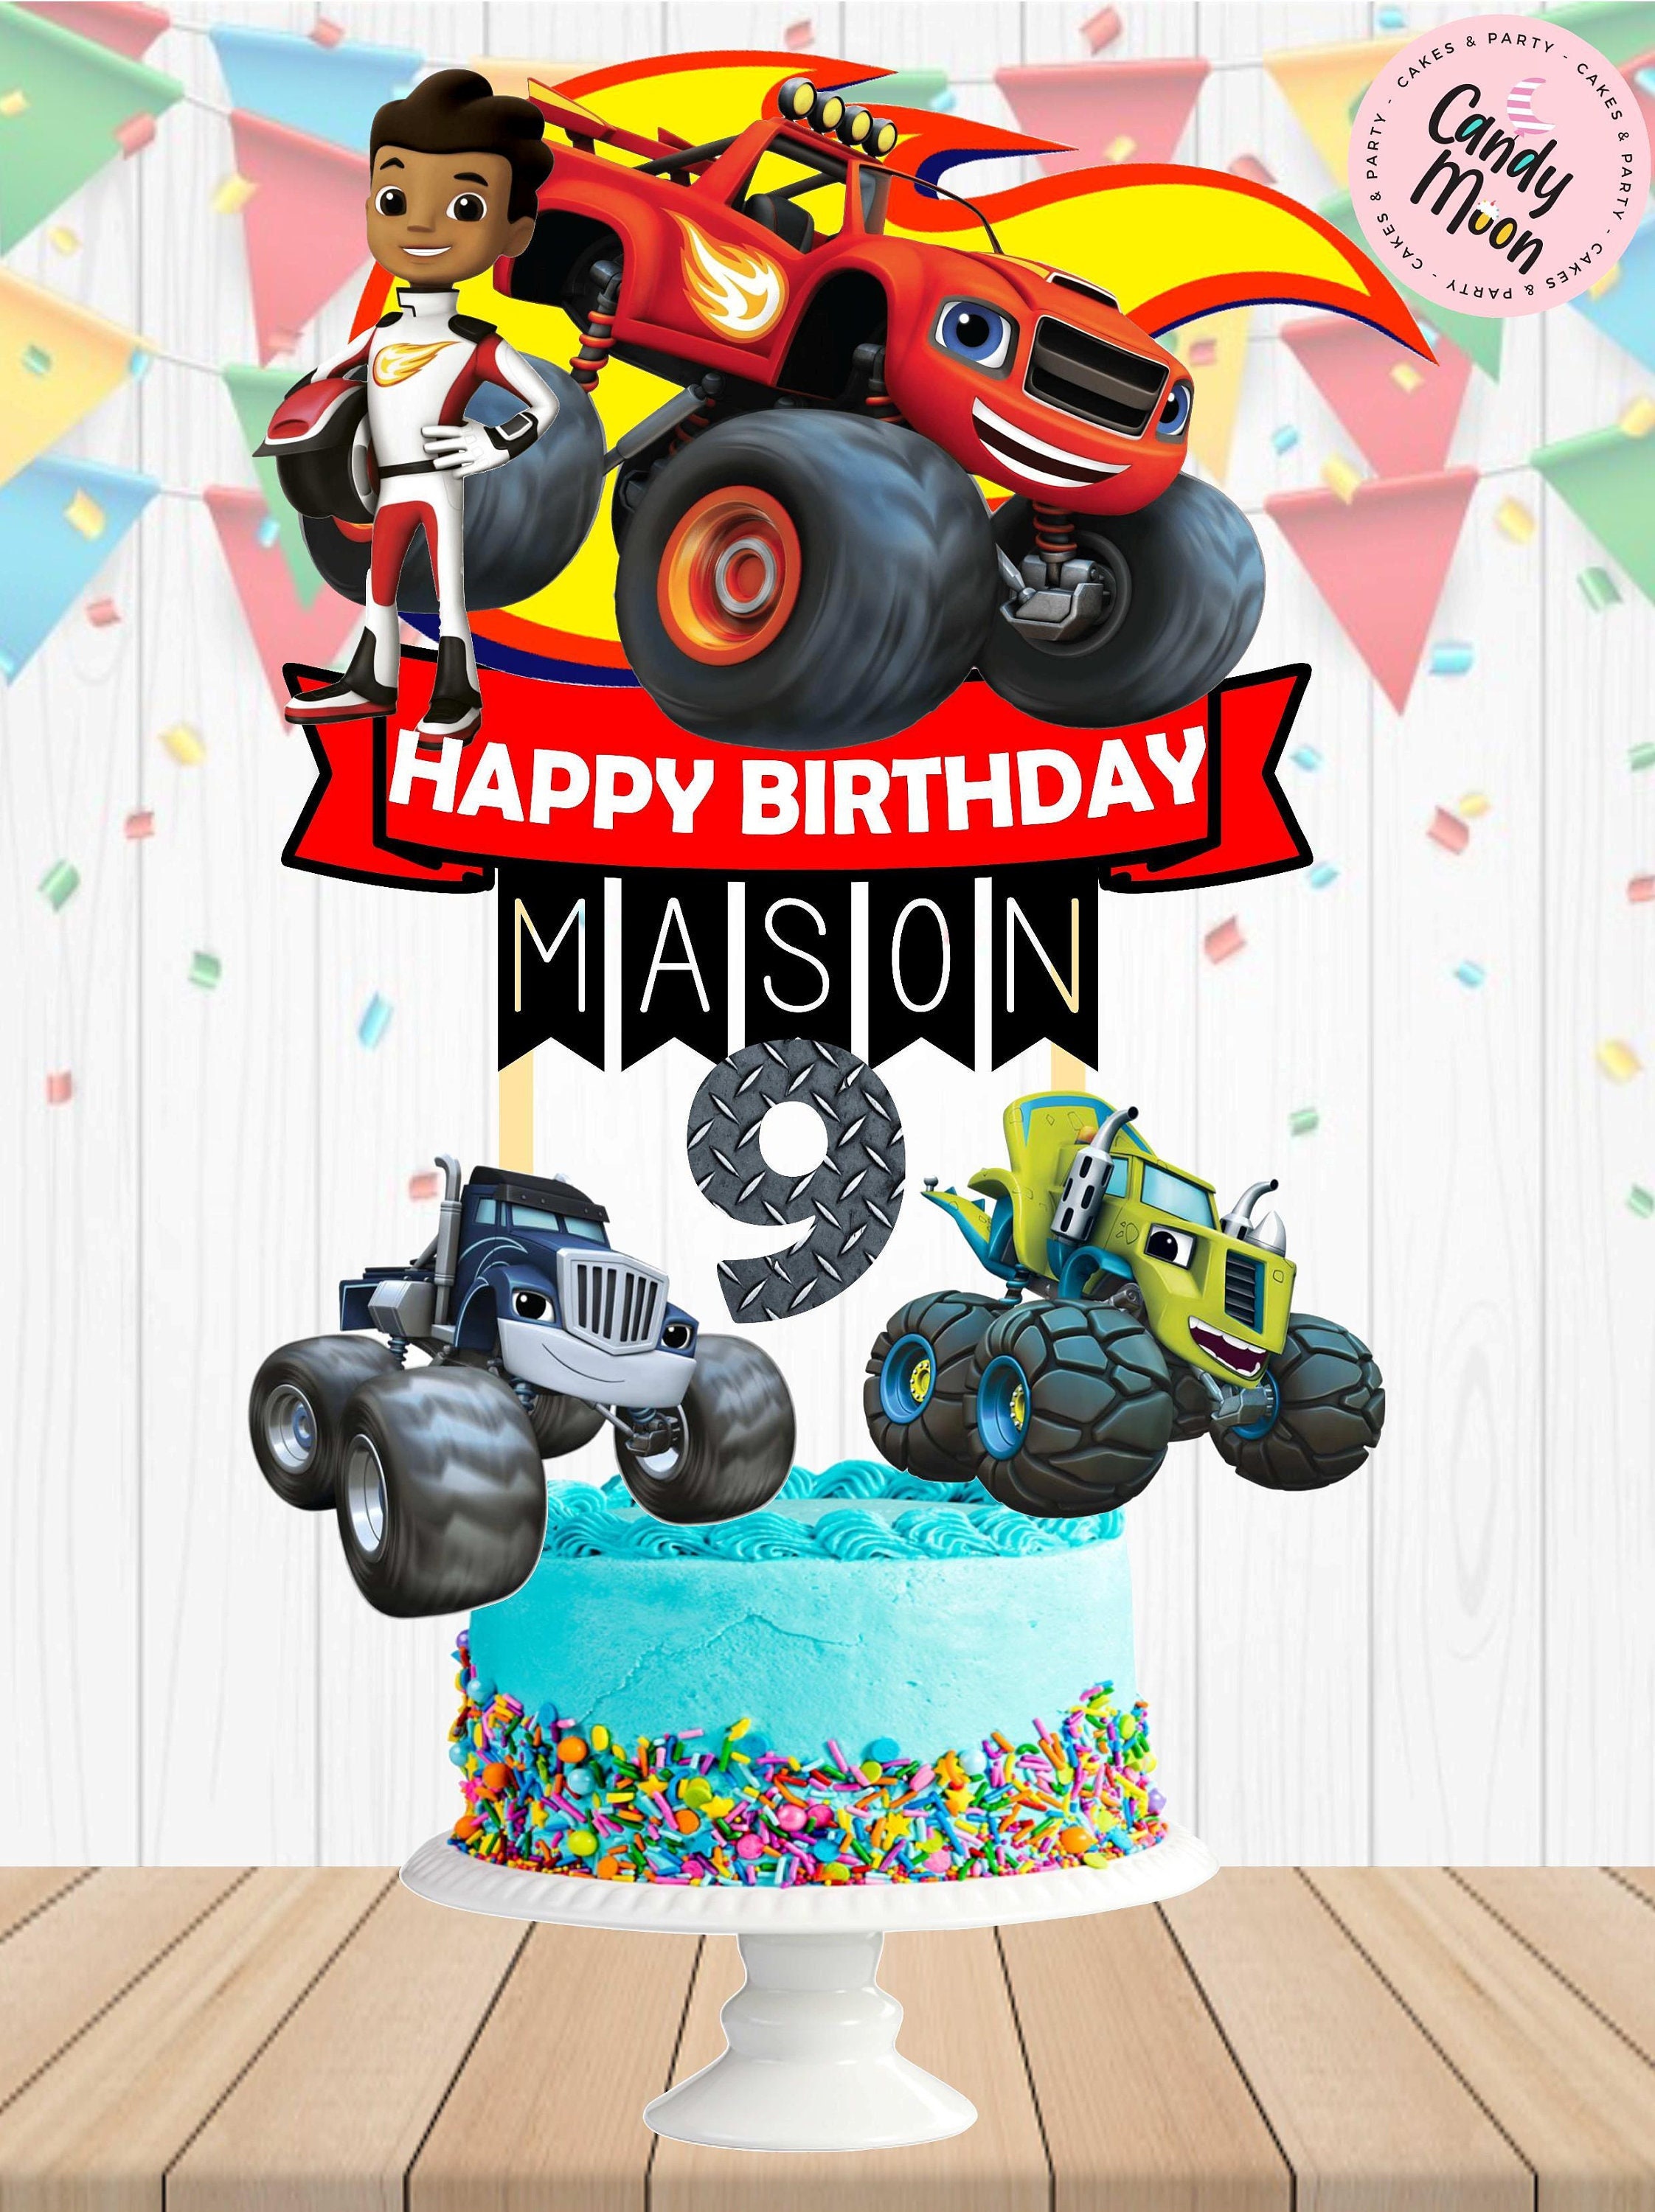 Blaze and the Monster Machines, Blaze and the Monster Machines Cake ...